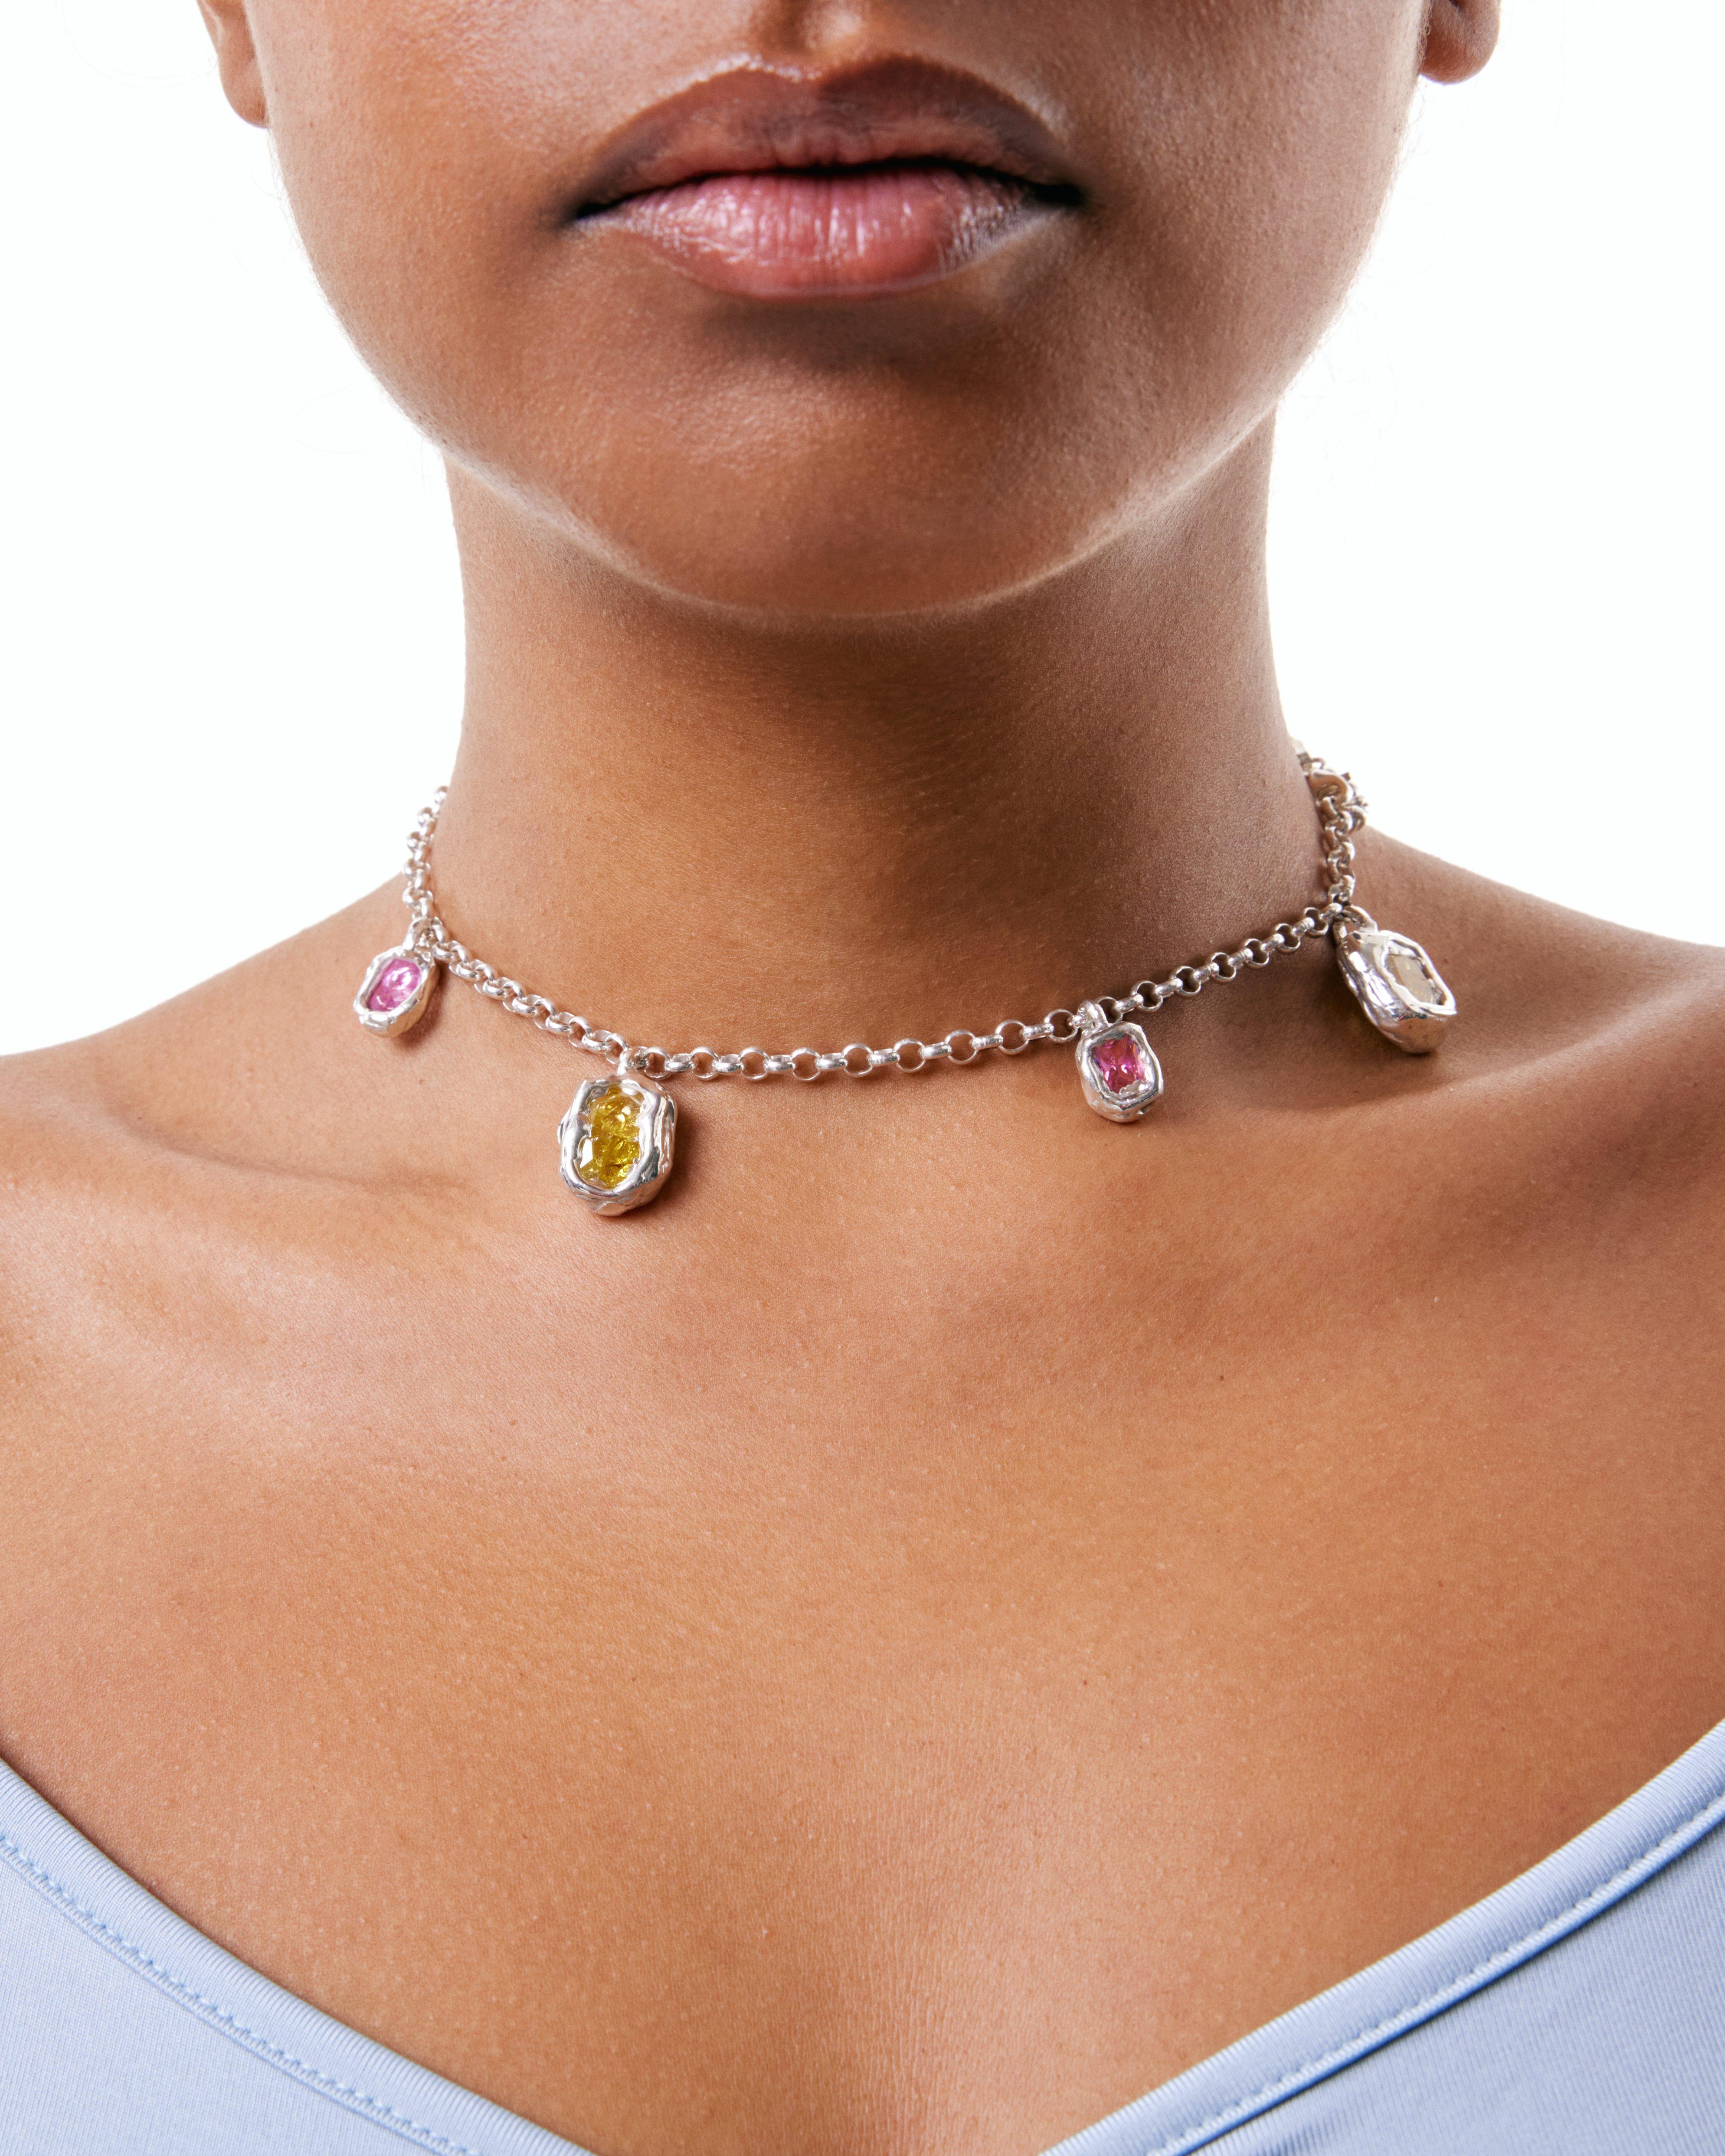 Silver chain with 4 zircons pendant in pink and yellow. The materials are 80% Sterling silver, 20% Zircon. Individually handcrafted in Spain, this piece is all about uniqueness and colour.

This necklace is 40cm long.

This piece is part of Rigido's